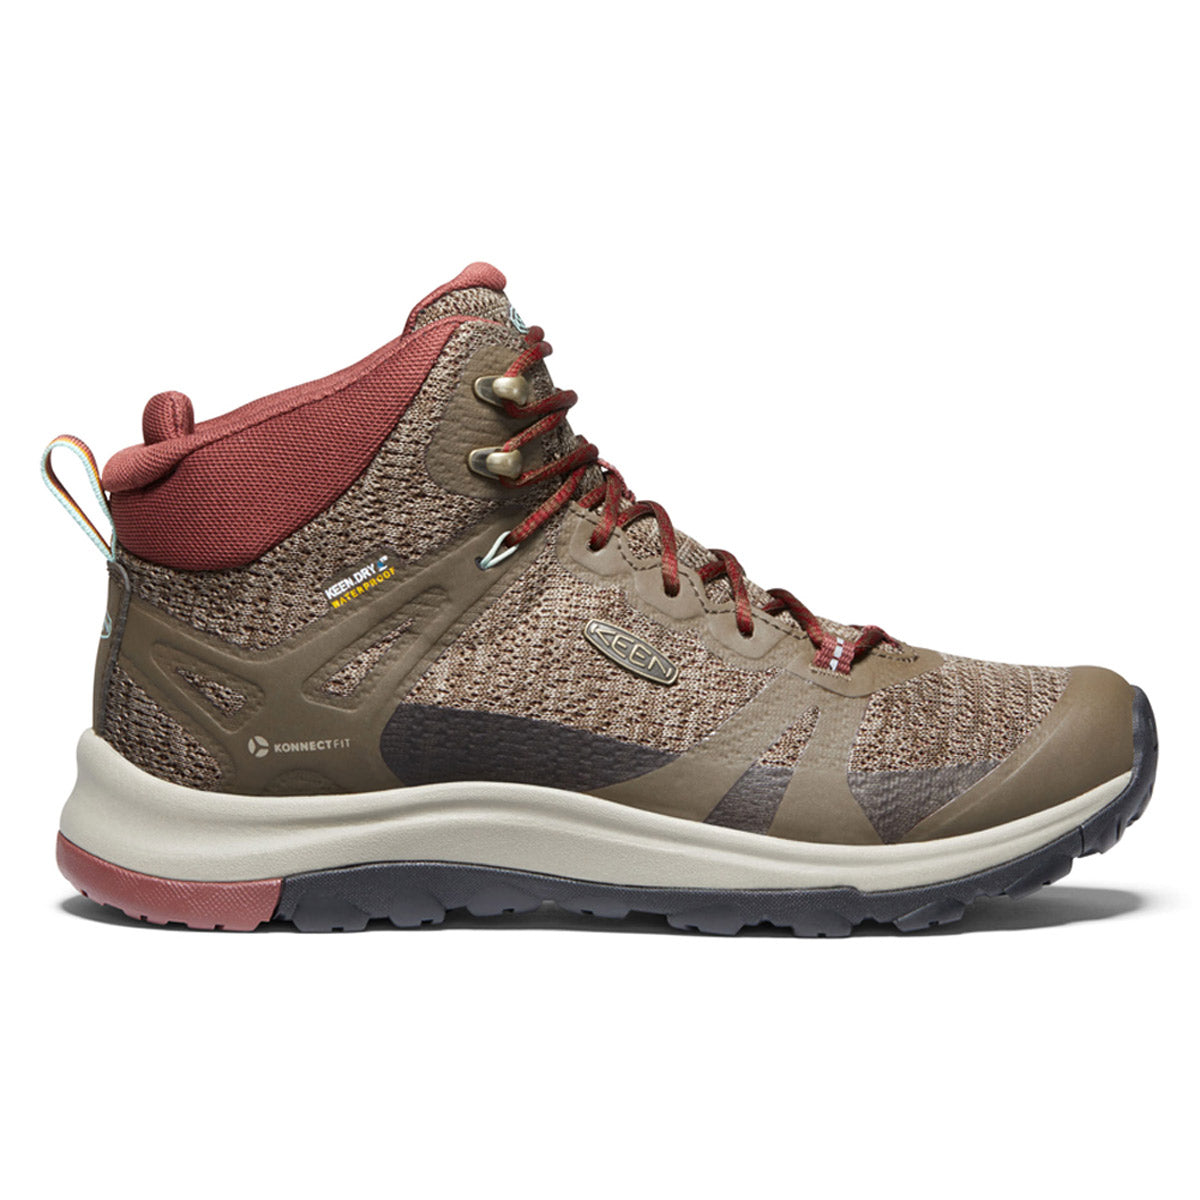 A single KEEN TERRADORA II MID CANTEEN/ANDORRA hiking boot featuring a combination of red and brown colors with a sturdy KEEN.ALL-TERRAIN rubber outsole and a keen logo on the side.